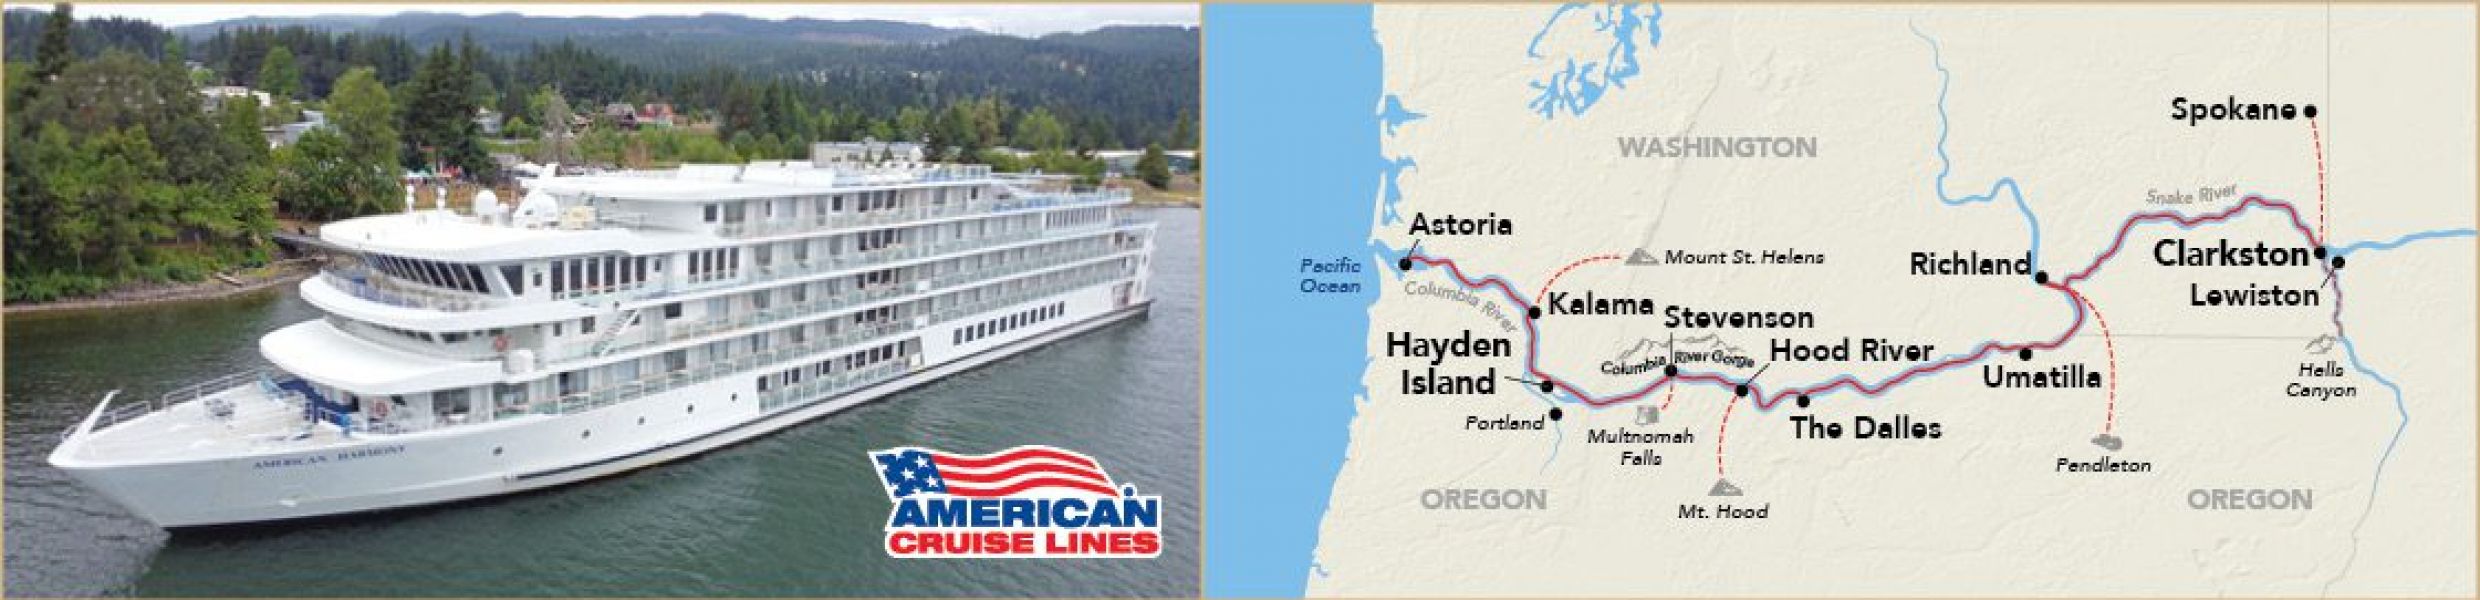 american cruise lines on the trail of lewis and clark